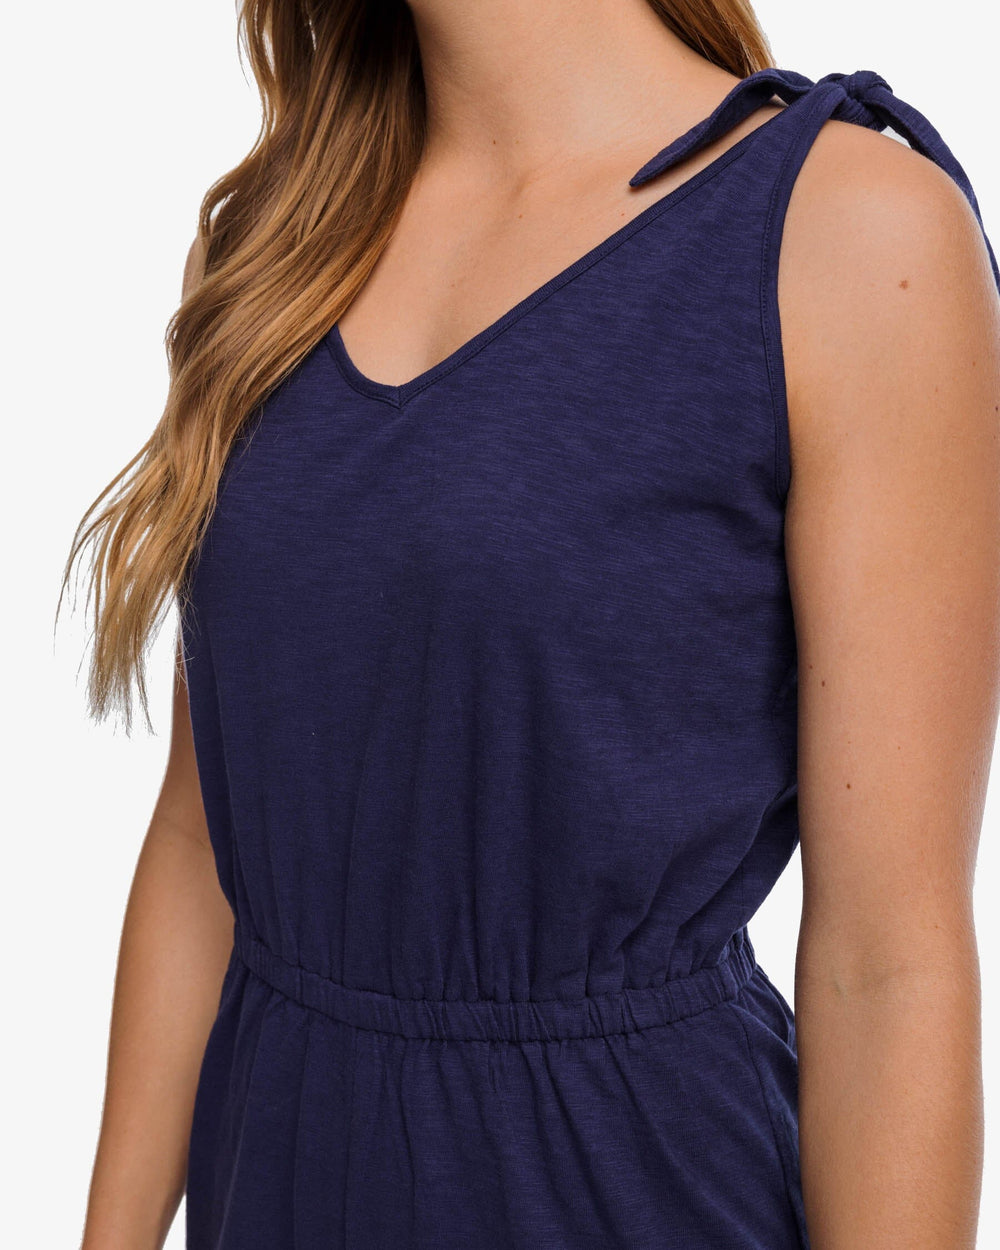 The detail view of the Southern Tide Tillie Sun Farer Tie Shoulder Romper by Southern Tide - Nautical Navy